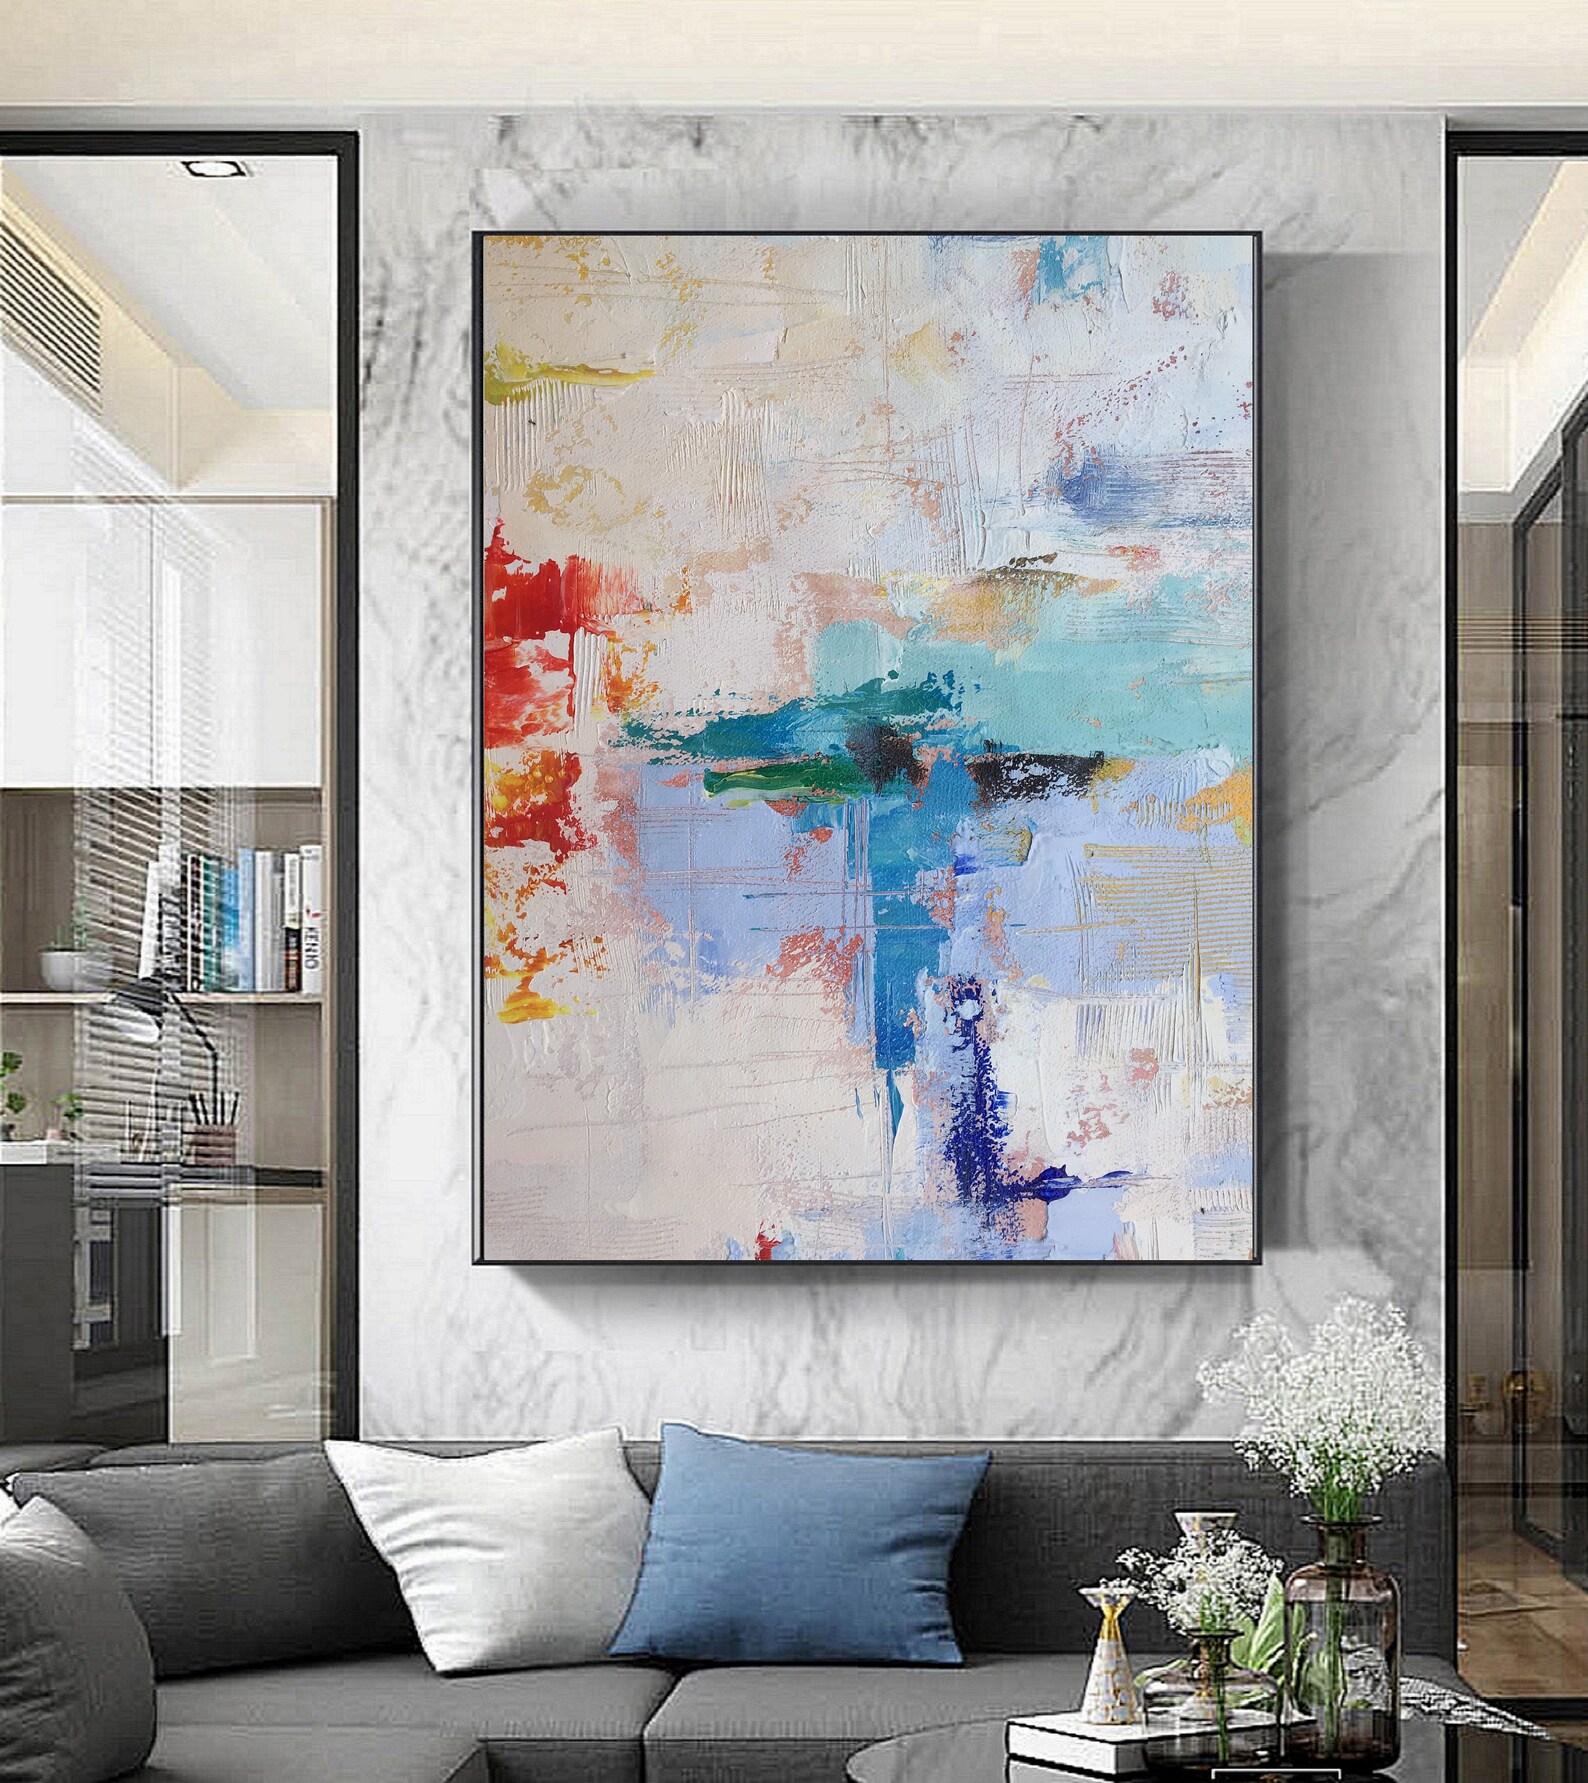 Large Abstract Painting Paintings on Canvasmodern Hand Oil - Etsy